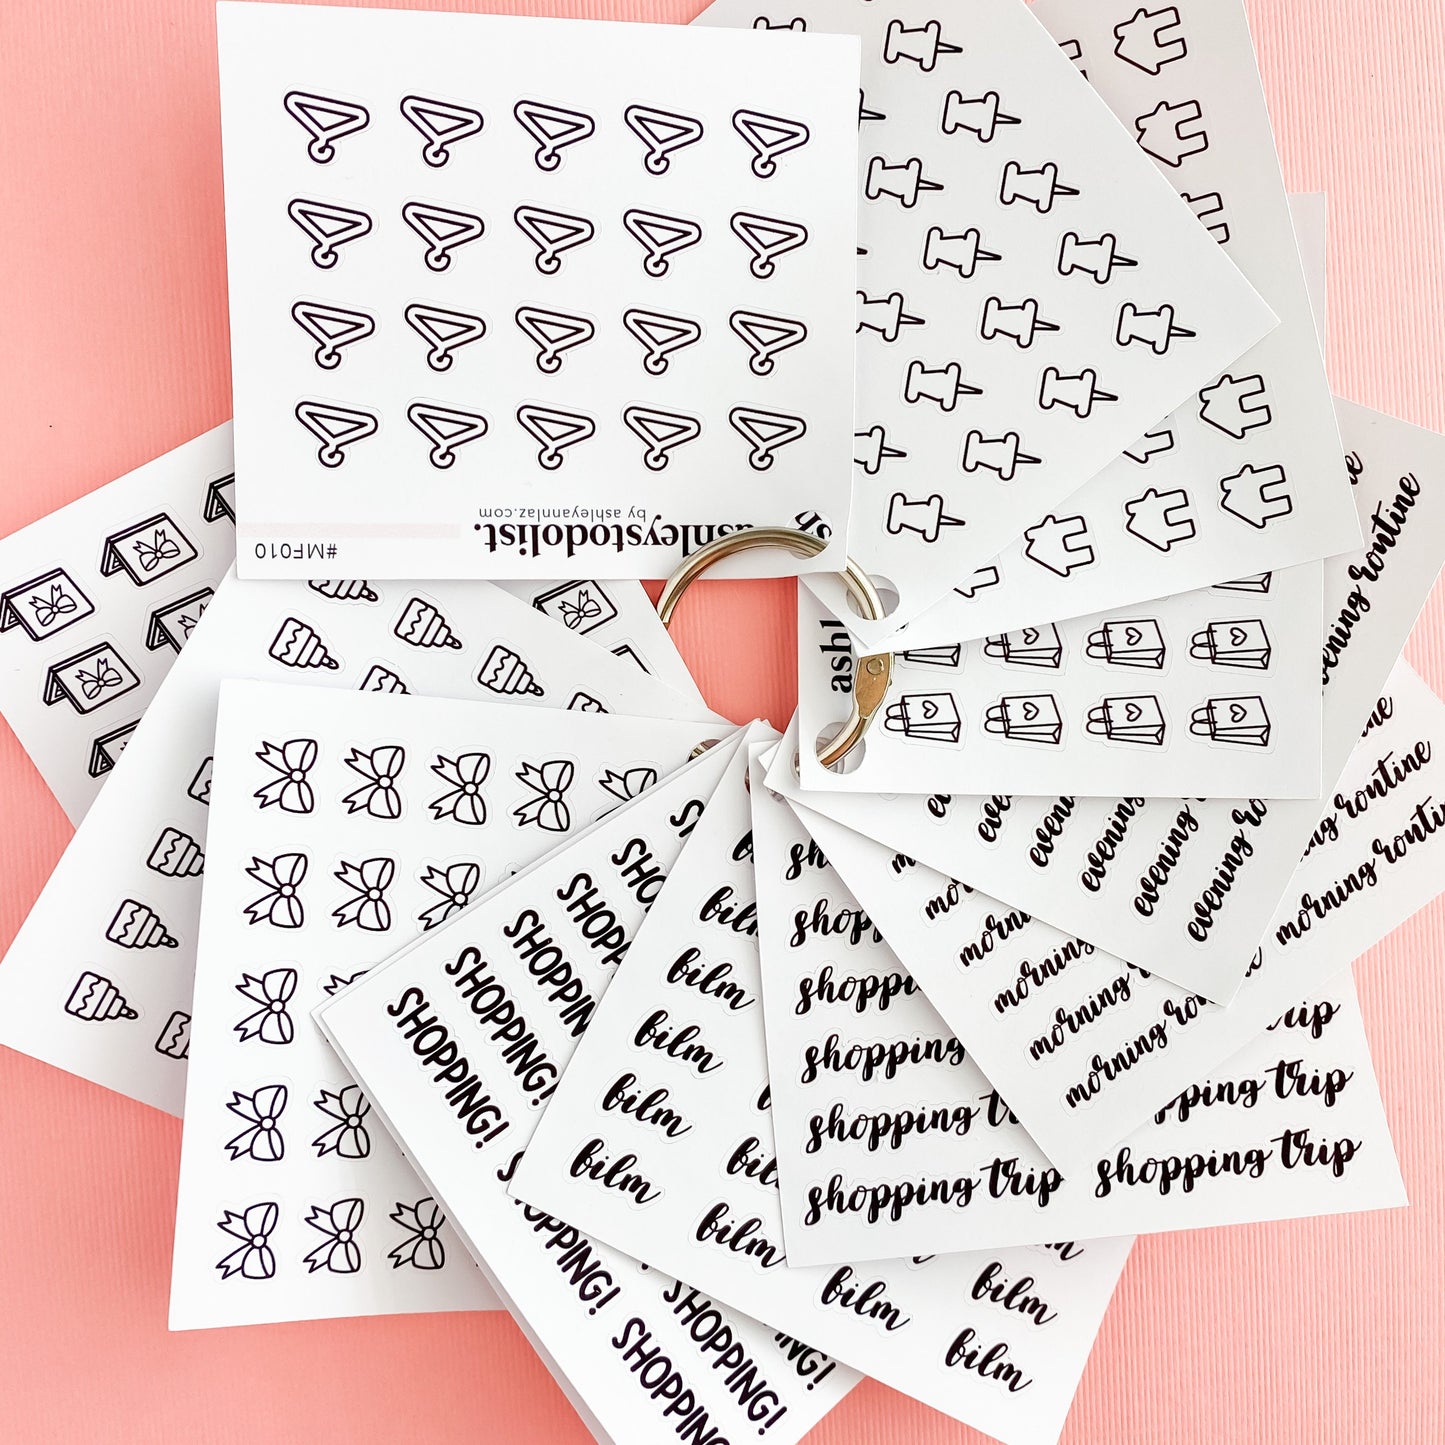 Dollar Signs / Bill Pay Phrases Mini Functional Stickers